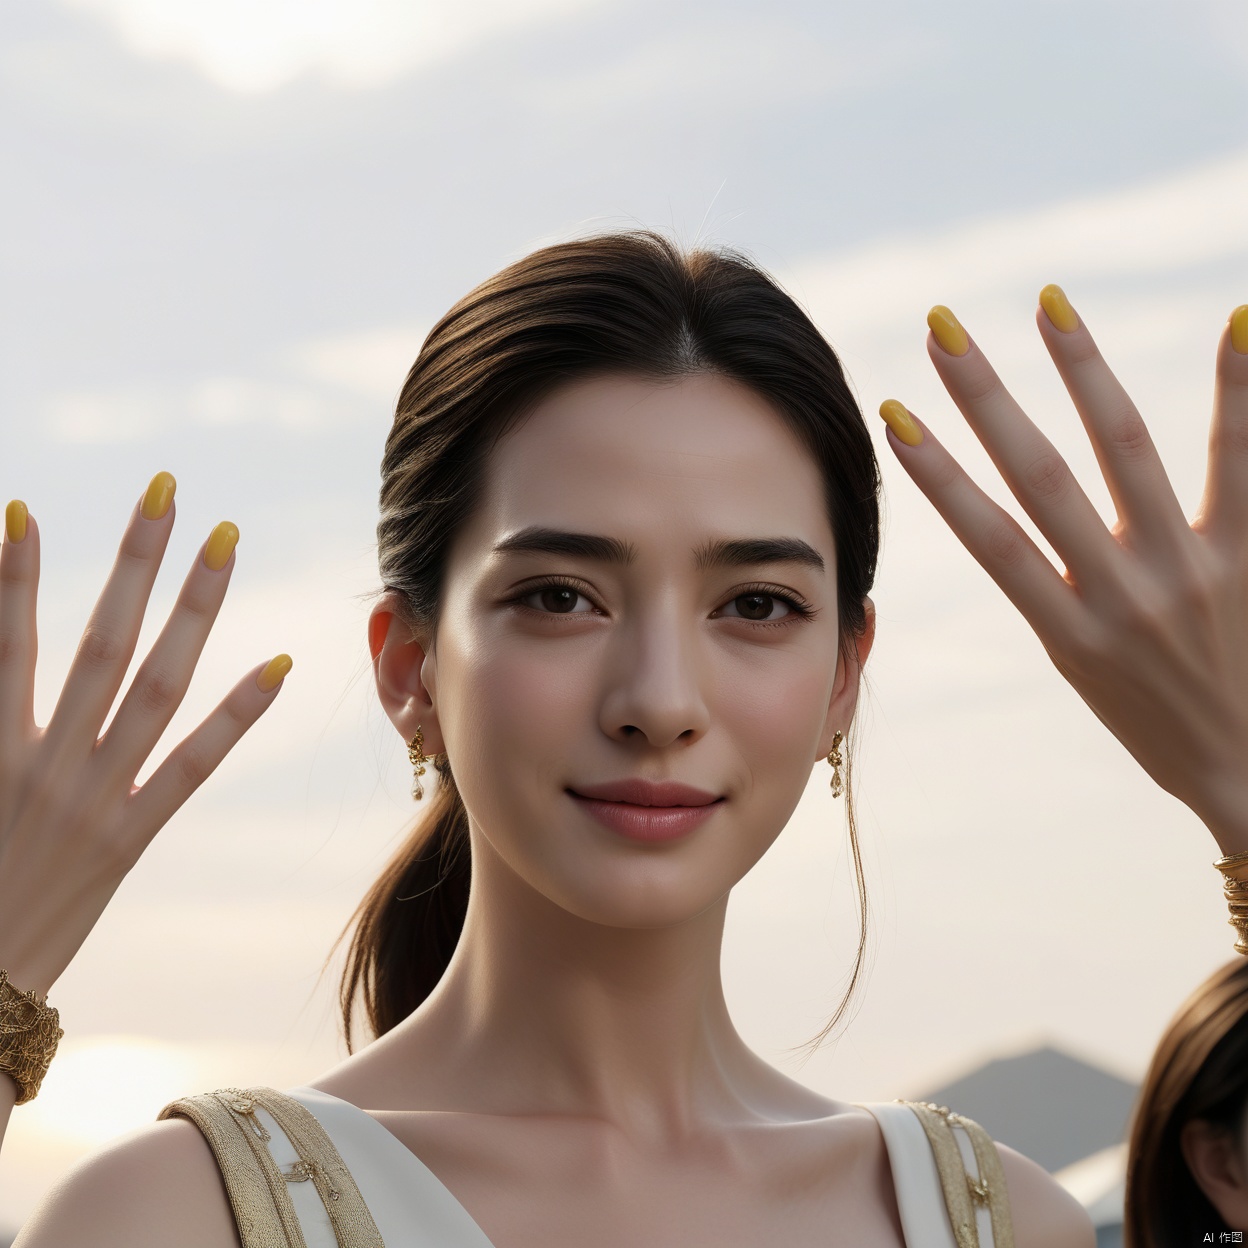  High quality full HD picture,1girl,(((Realistic skin texture))),(((Five Fingers))),
(18 years old:1.2), 
yellow race,Asian,
Chinese people,HD quality, rich details, realistic photos, realistic style, clear facial features, complete facial features, complete fingers, straight nose, bright eyes, slim, slender,willowy
 MAJICMIX STYLE,((poakl)), g007,moyou, hand101, Anne Hathaway, Jennifer Connelly, Dasha Taran, liu yifei